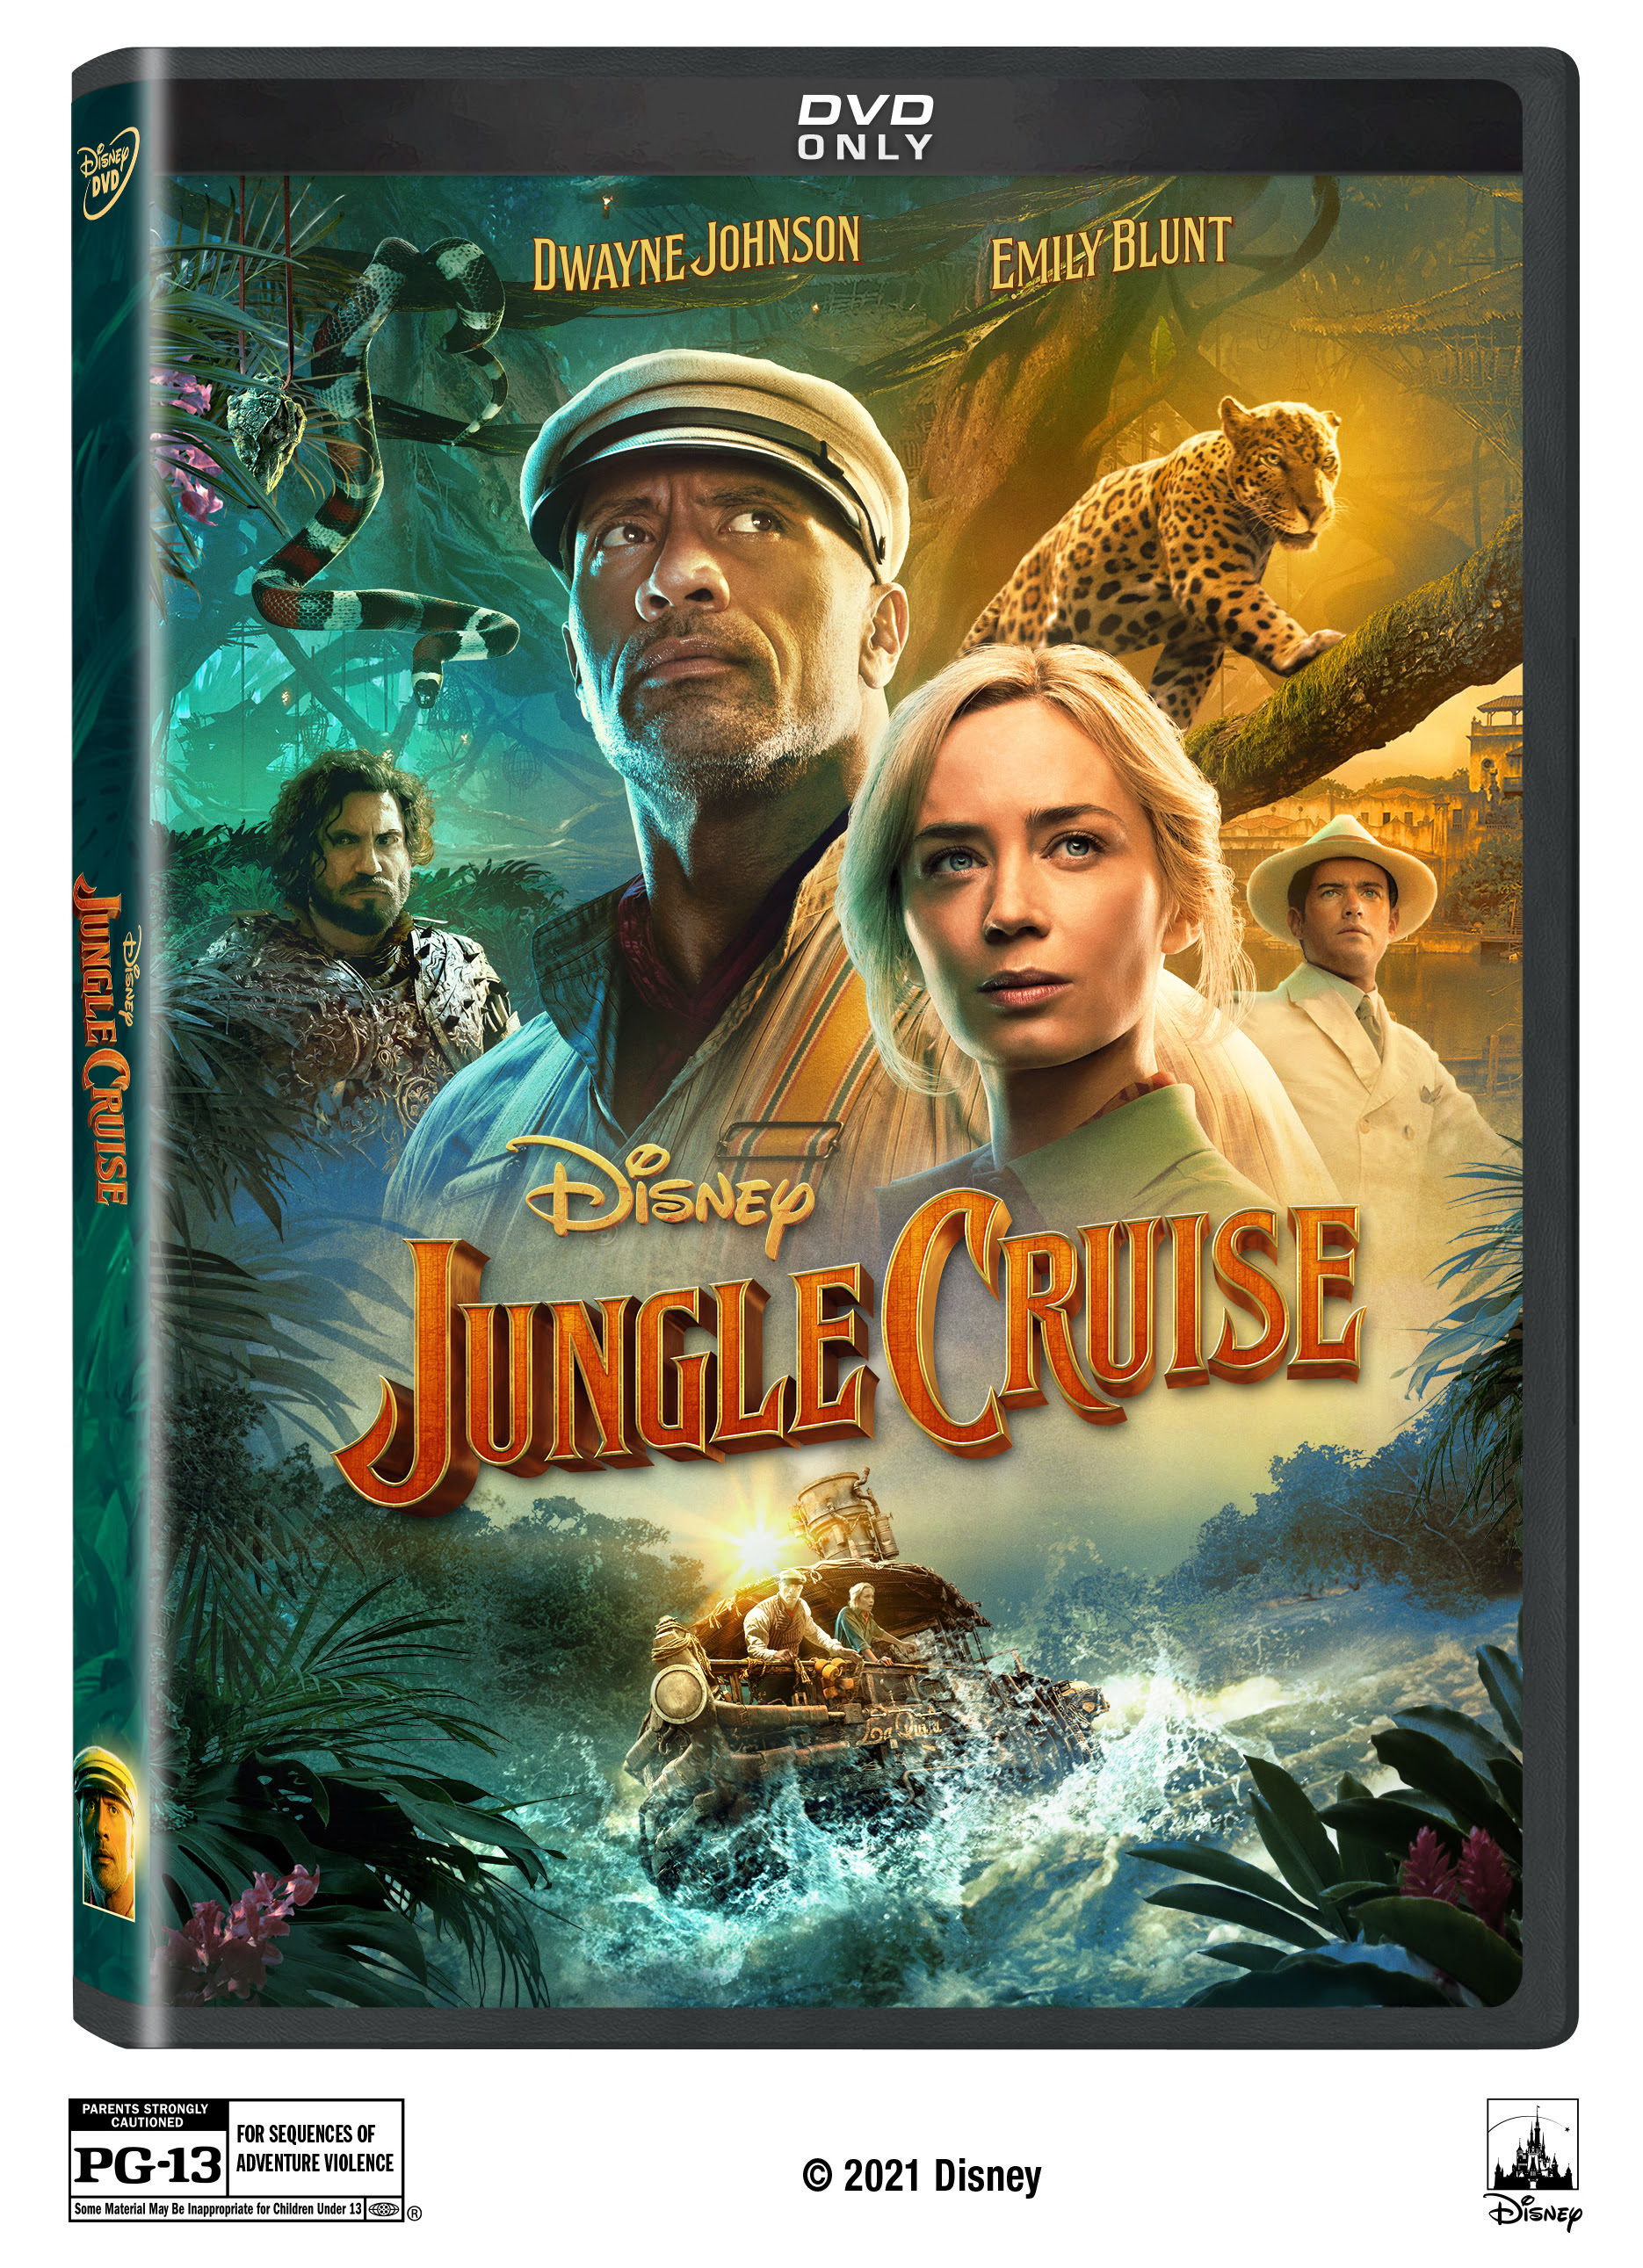 Disney's 'Jungle Cruise' is Coming to Blu-ray & DVD This November